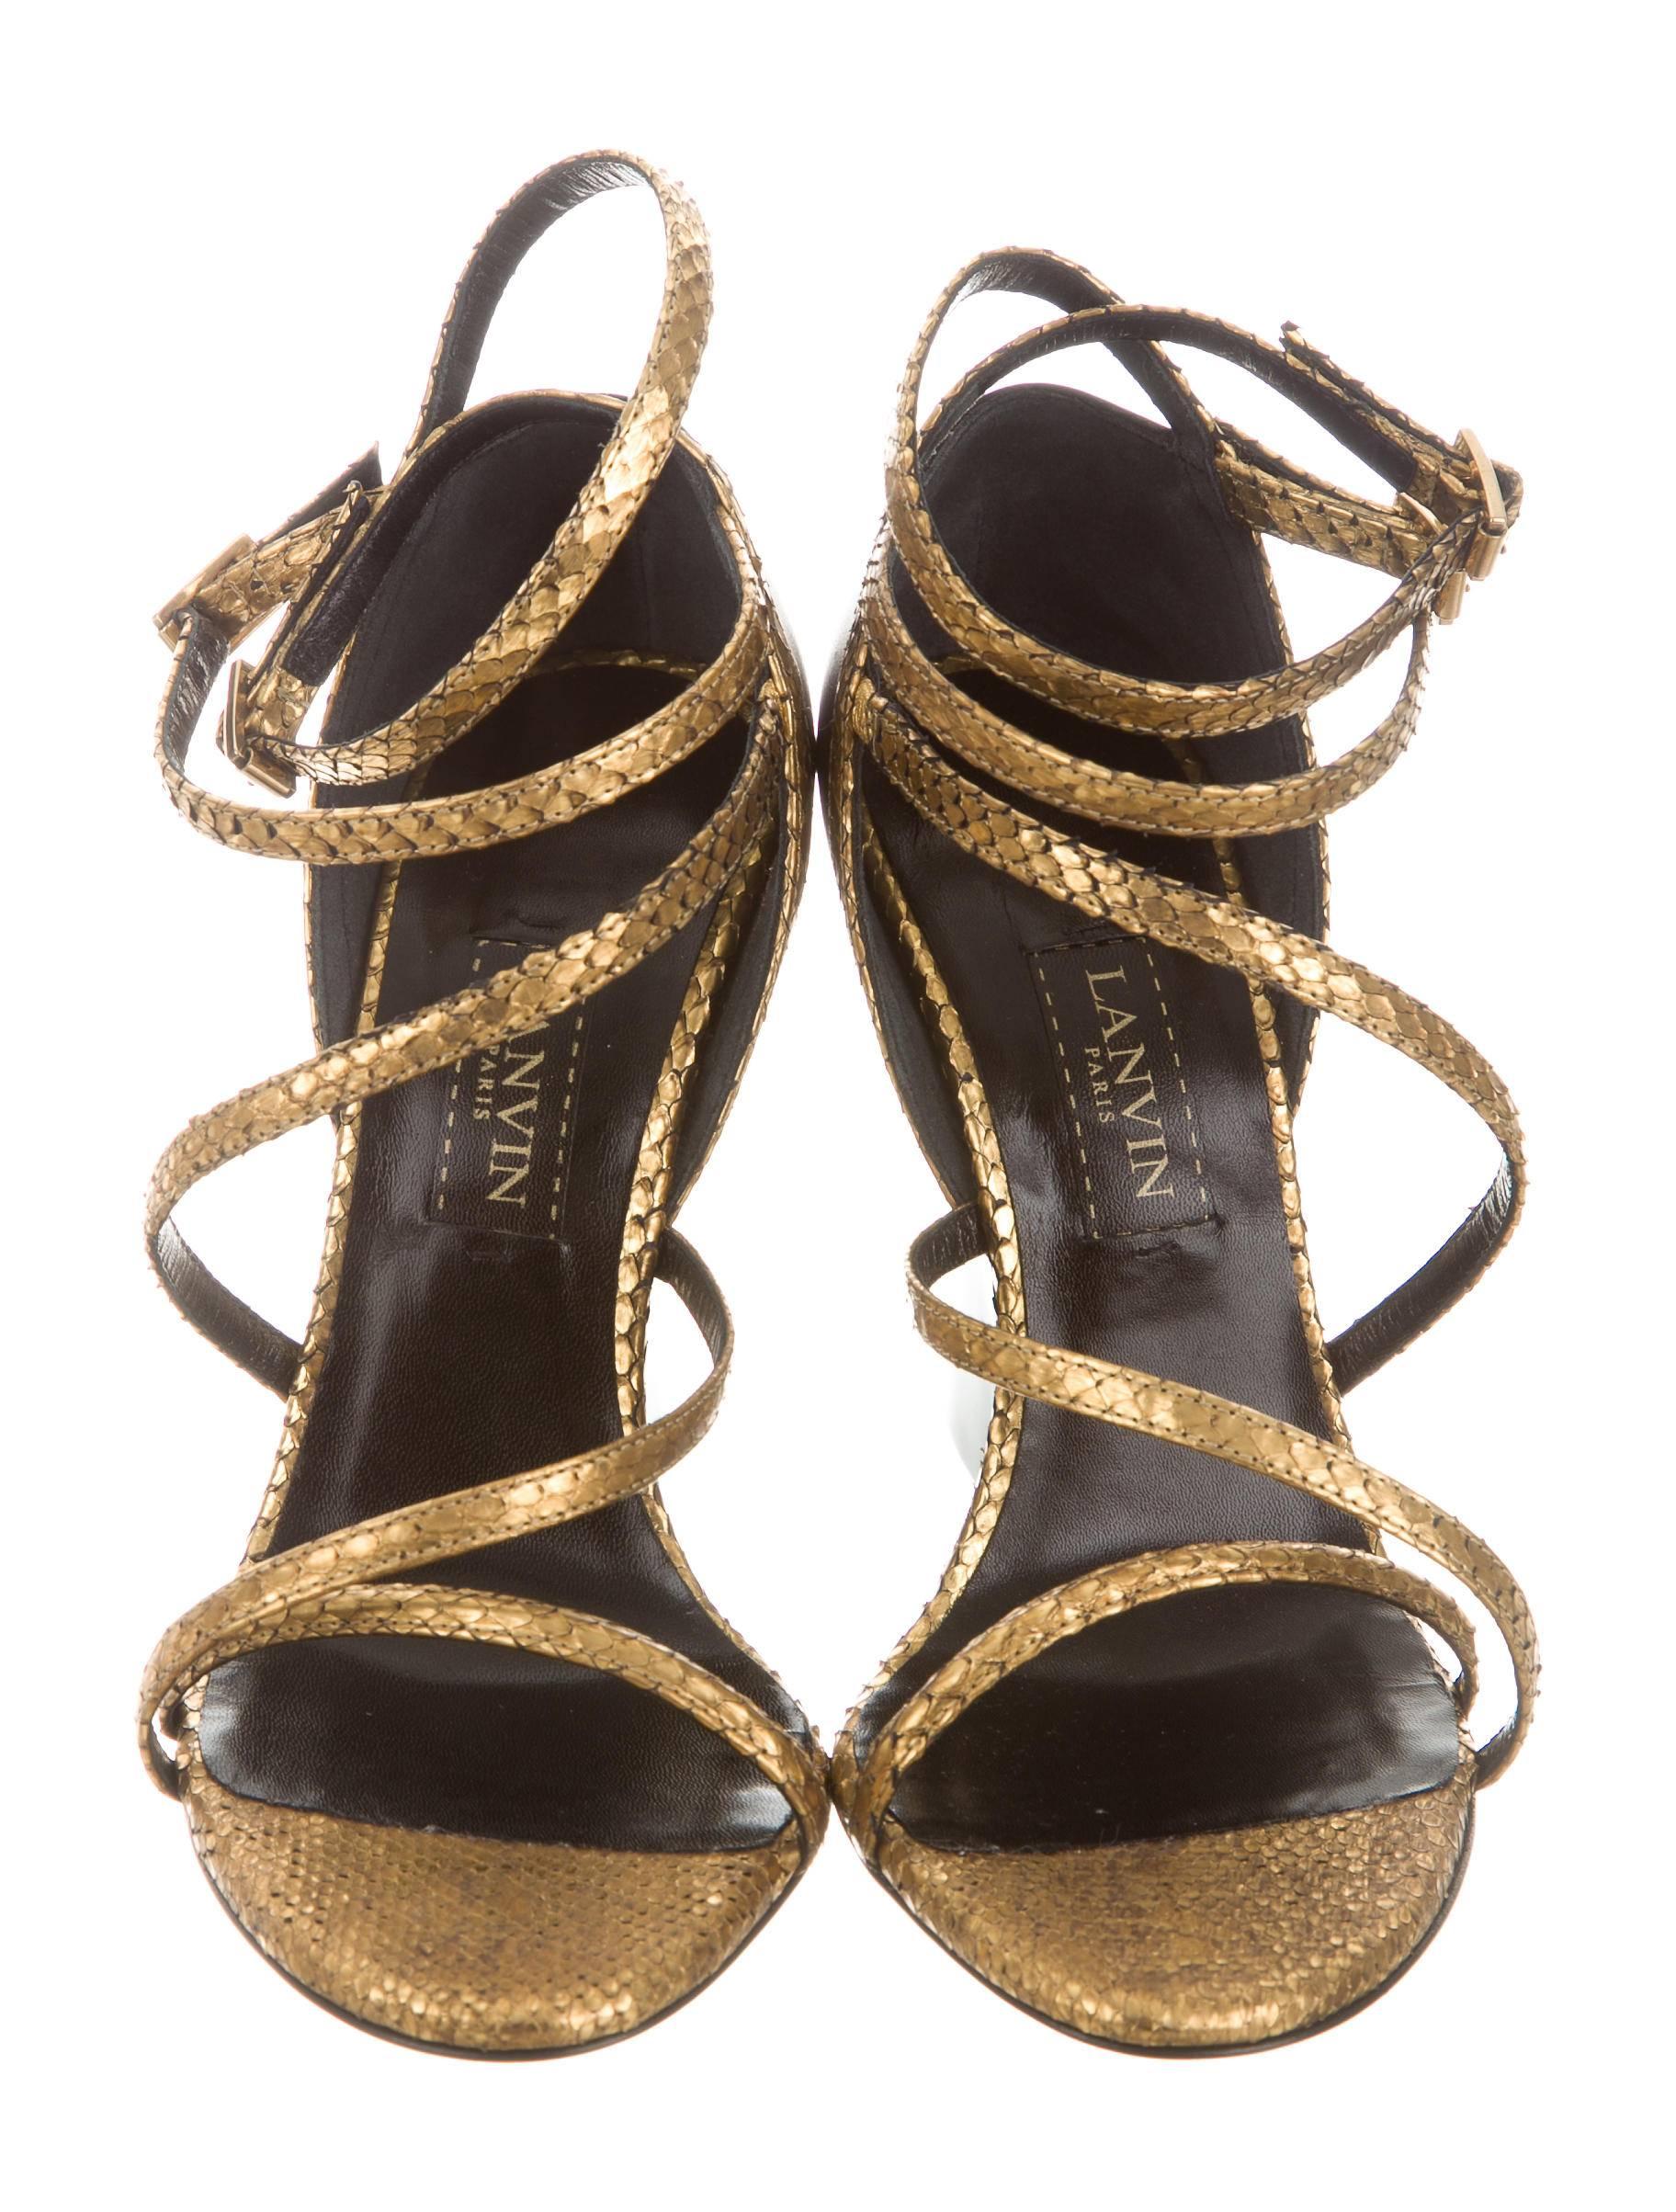 CURATOR'S NOTES

Lanvin New Gold Snake Brown Leather Wedge Strappy Sandals Heels  

Size IT 36.5
Snakeskin
Leather
Ankle buckle closure
Made in Italy 
Heel height 3.75"
Includes original Lanvin dust bag